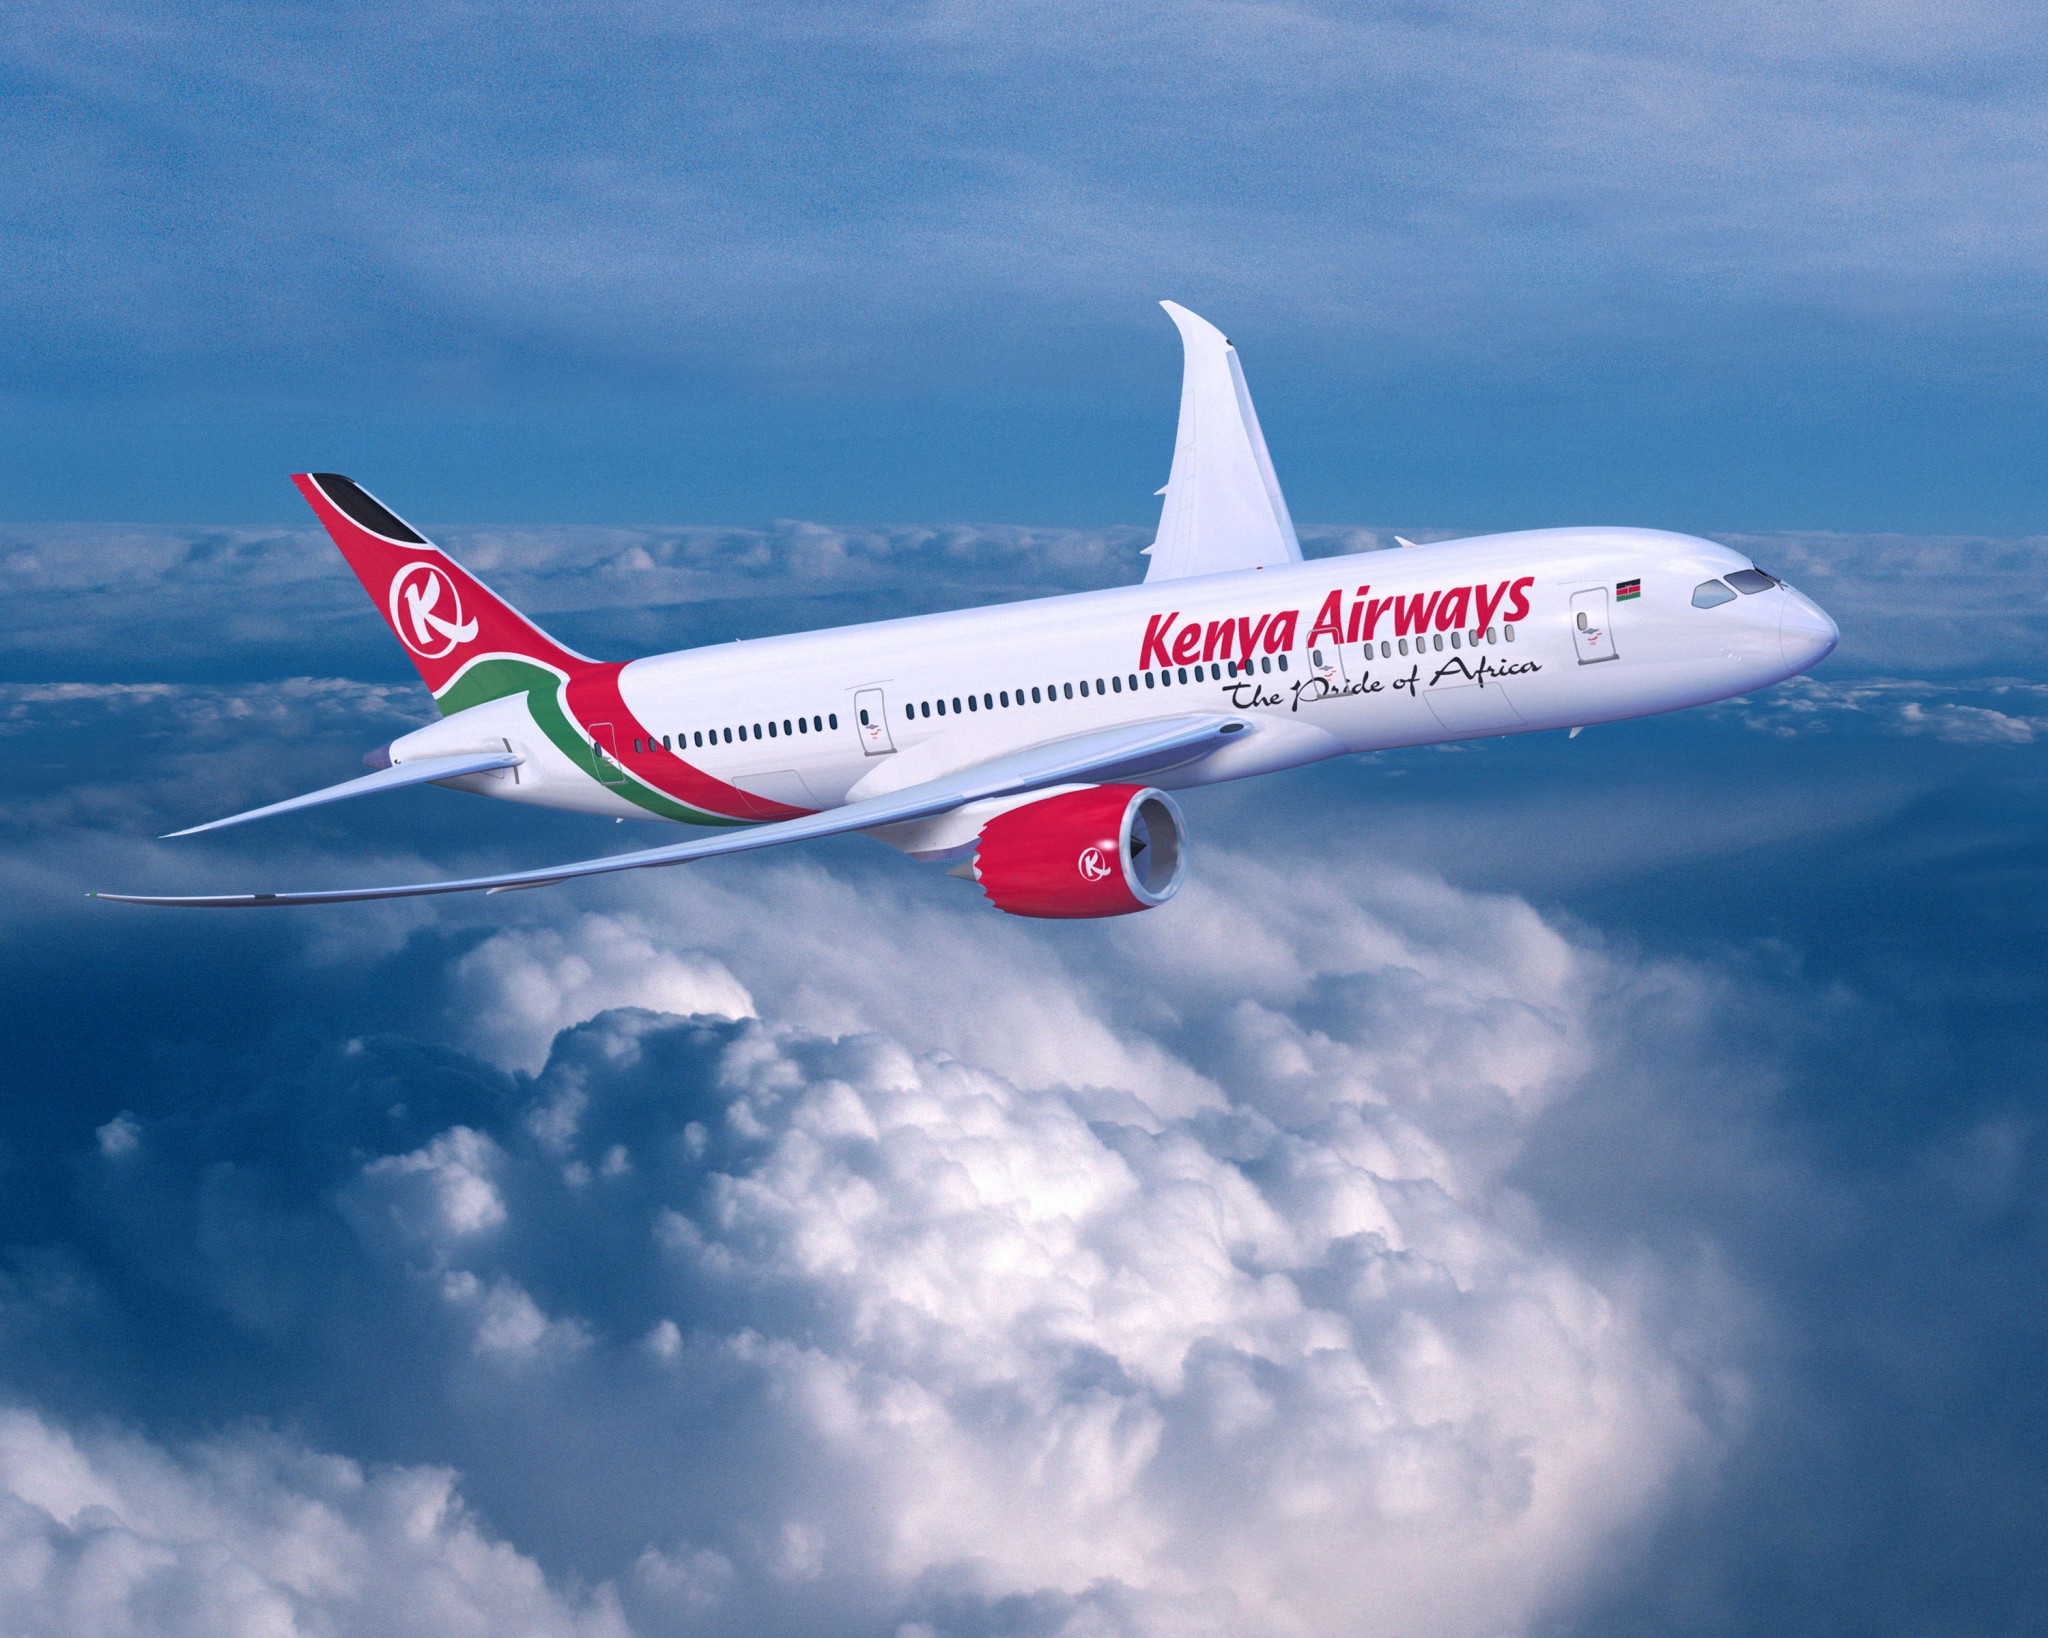 Kenya Airways takes the lead in Africa for SAF use on long-haul flights